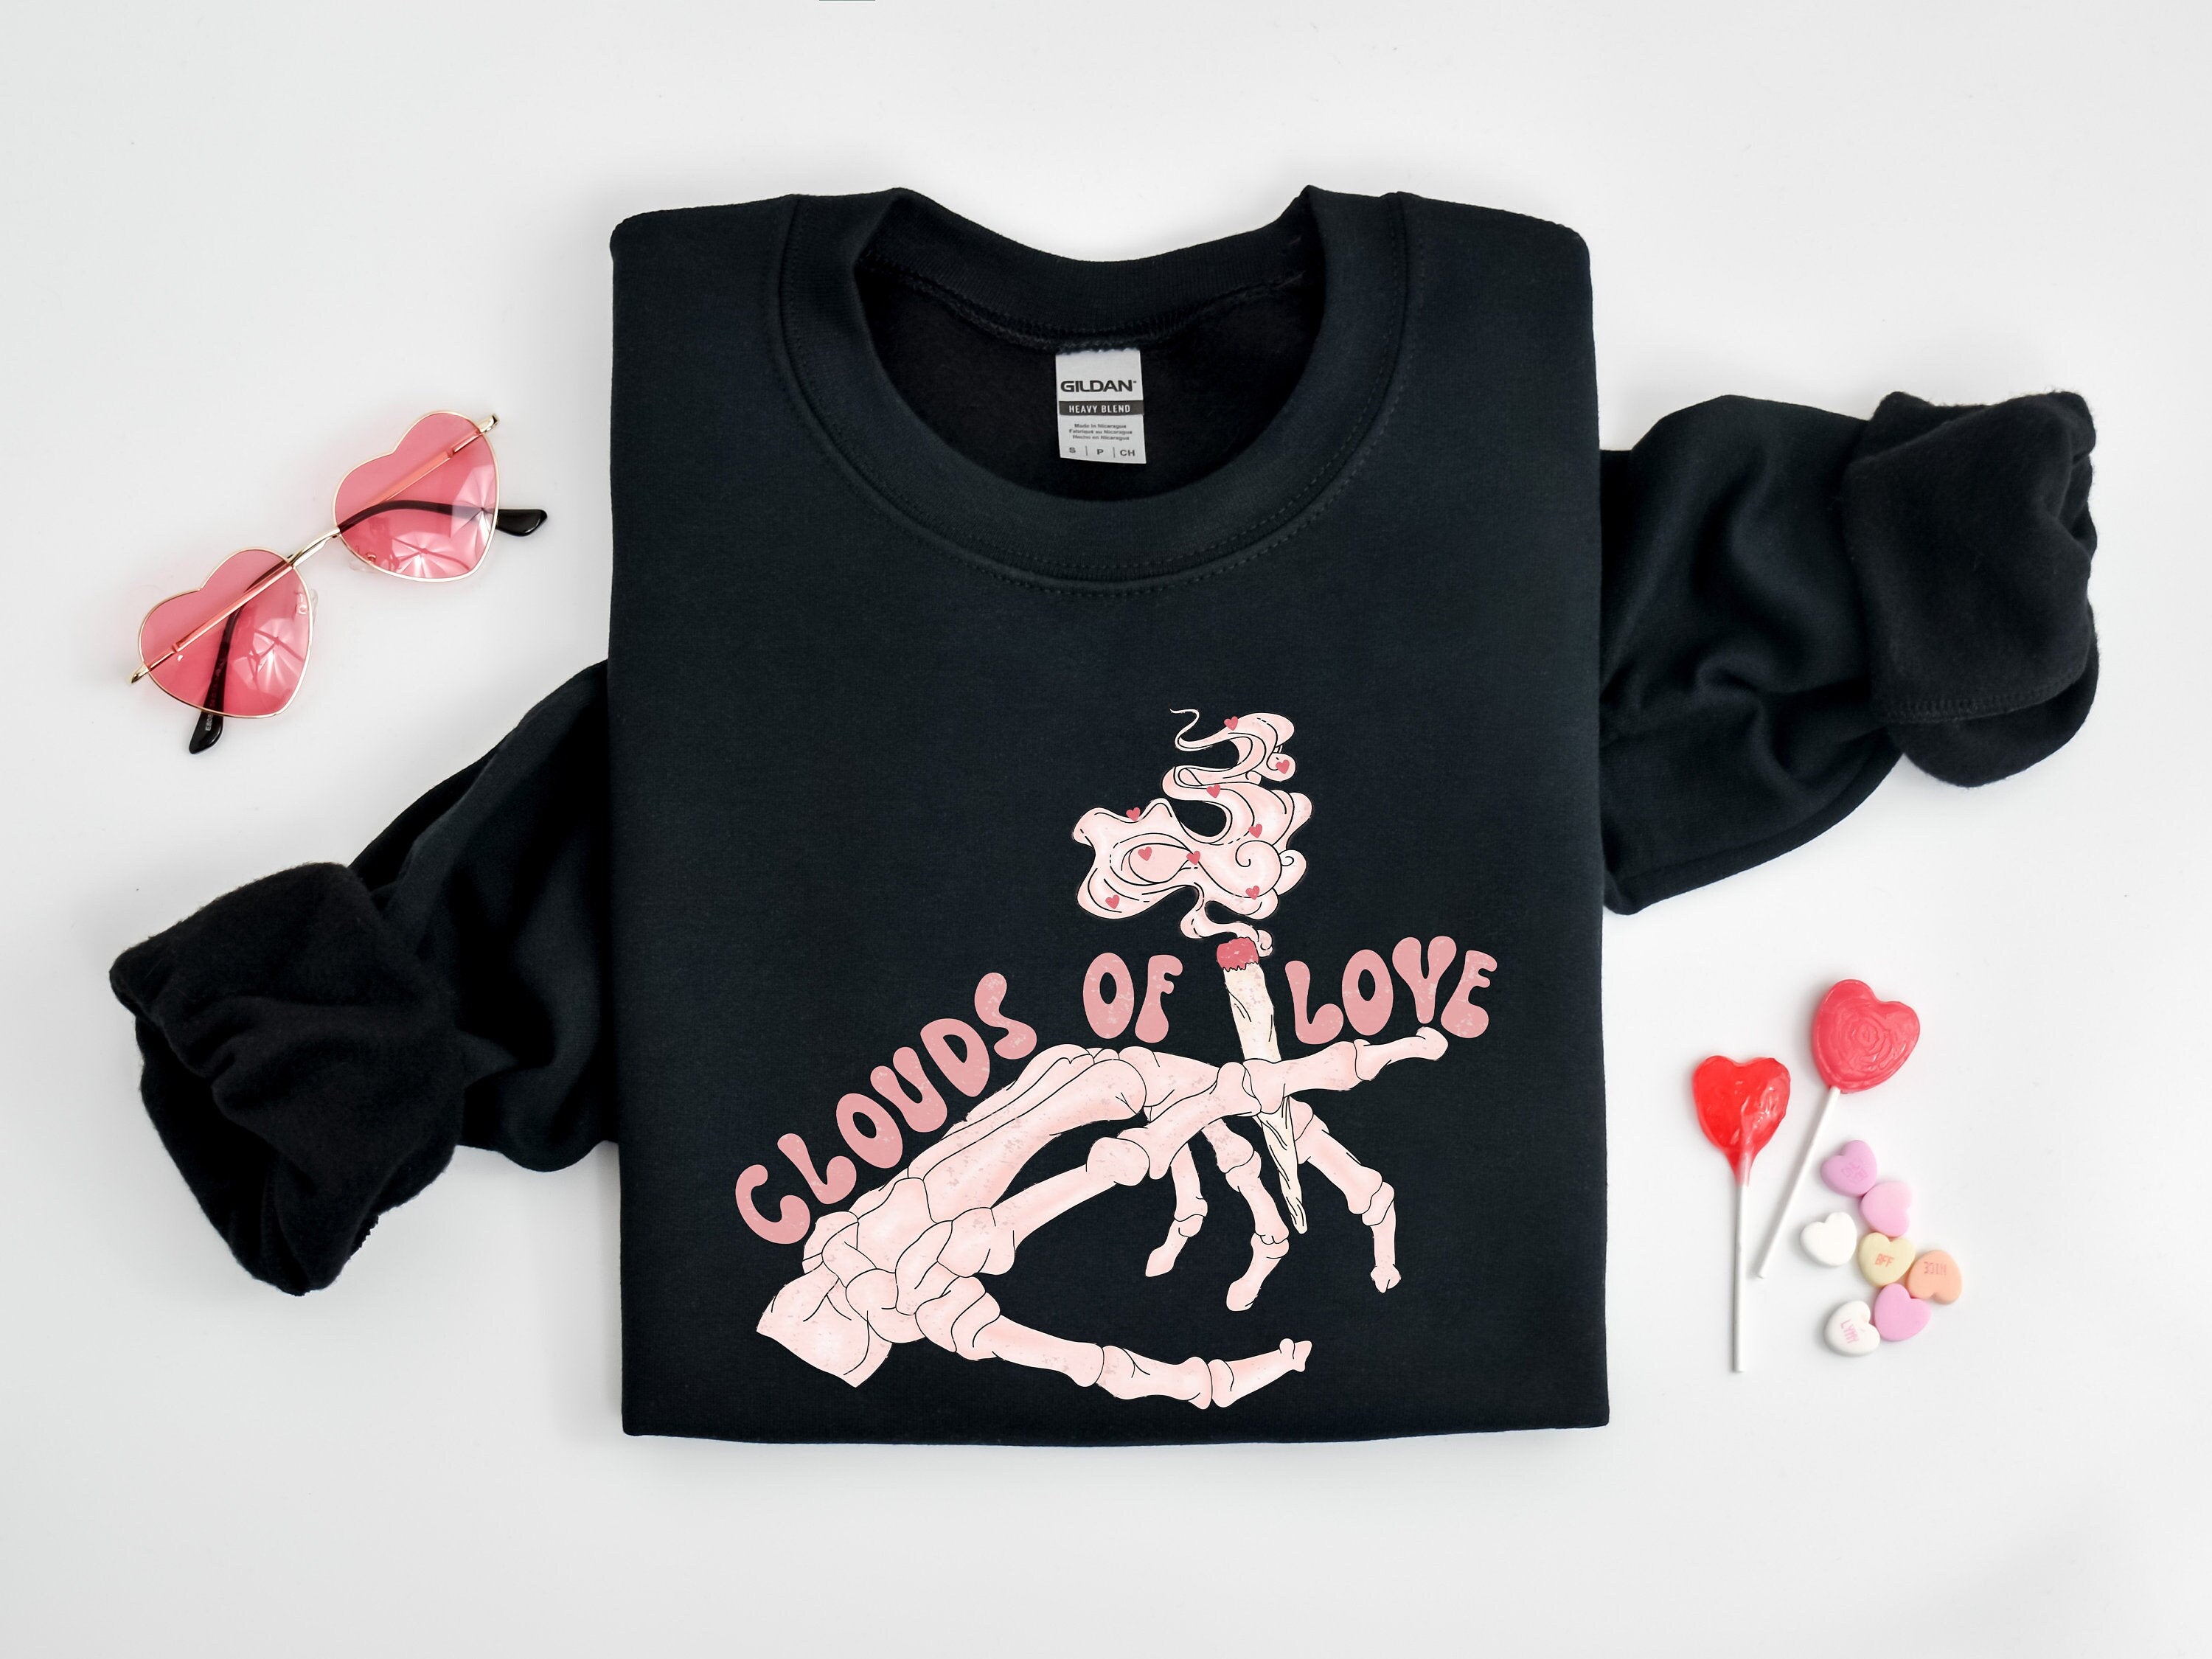 Clouds of Love Shirt